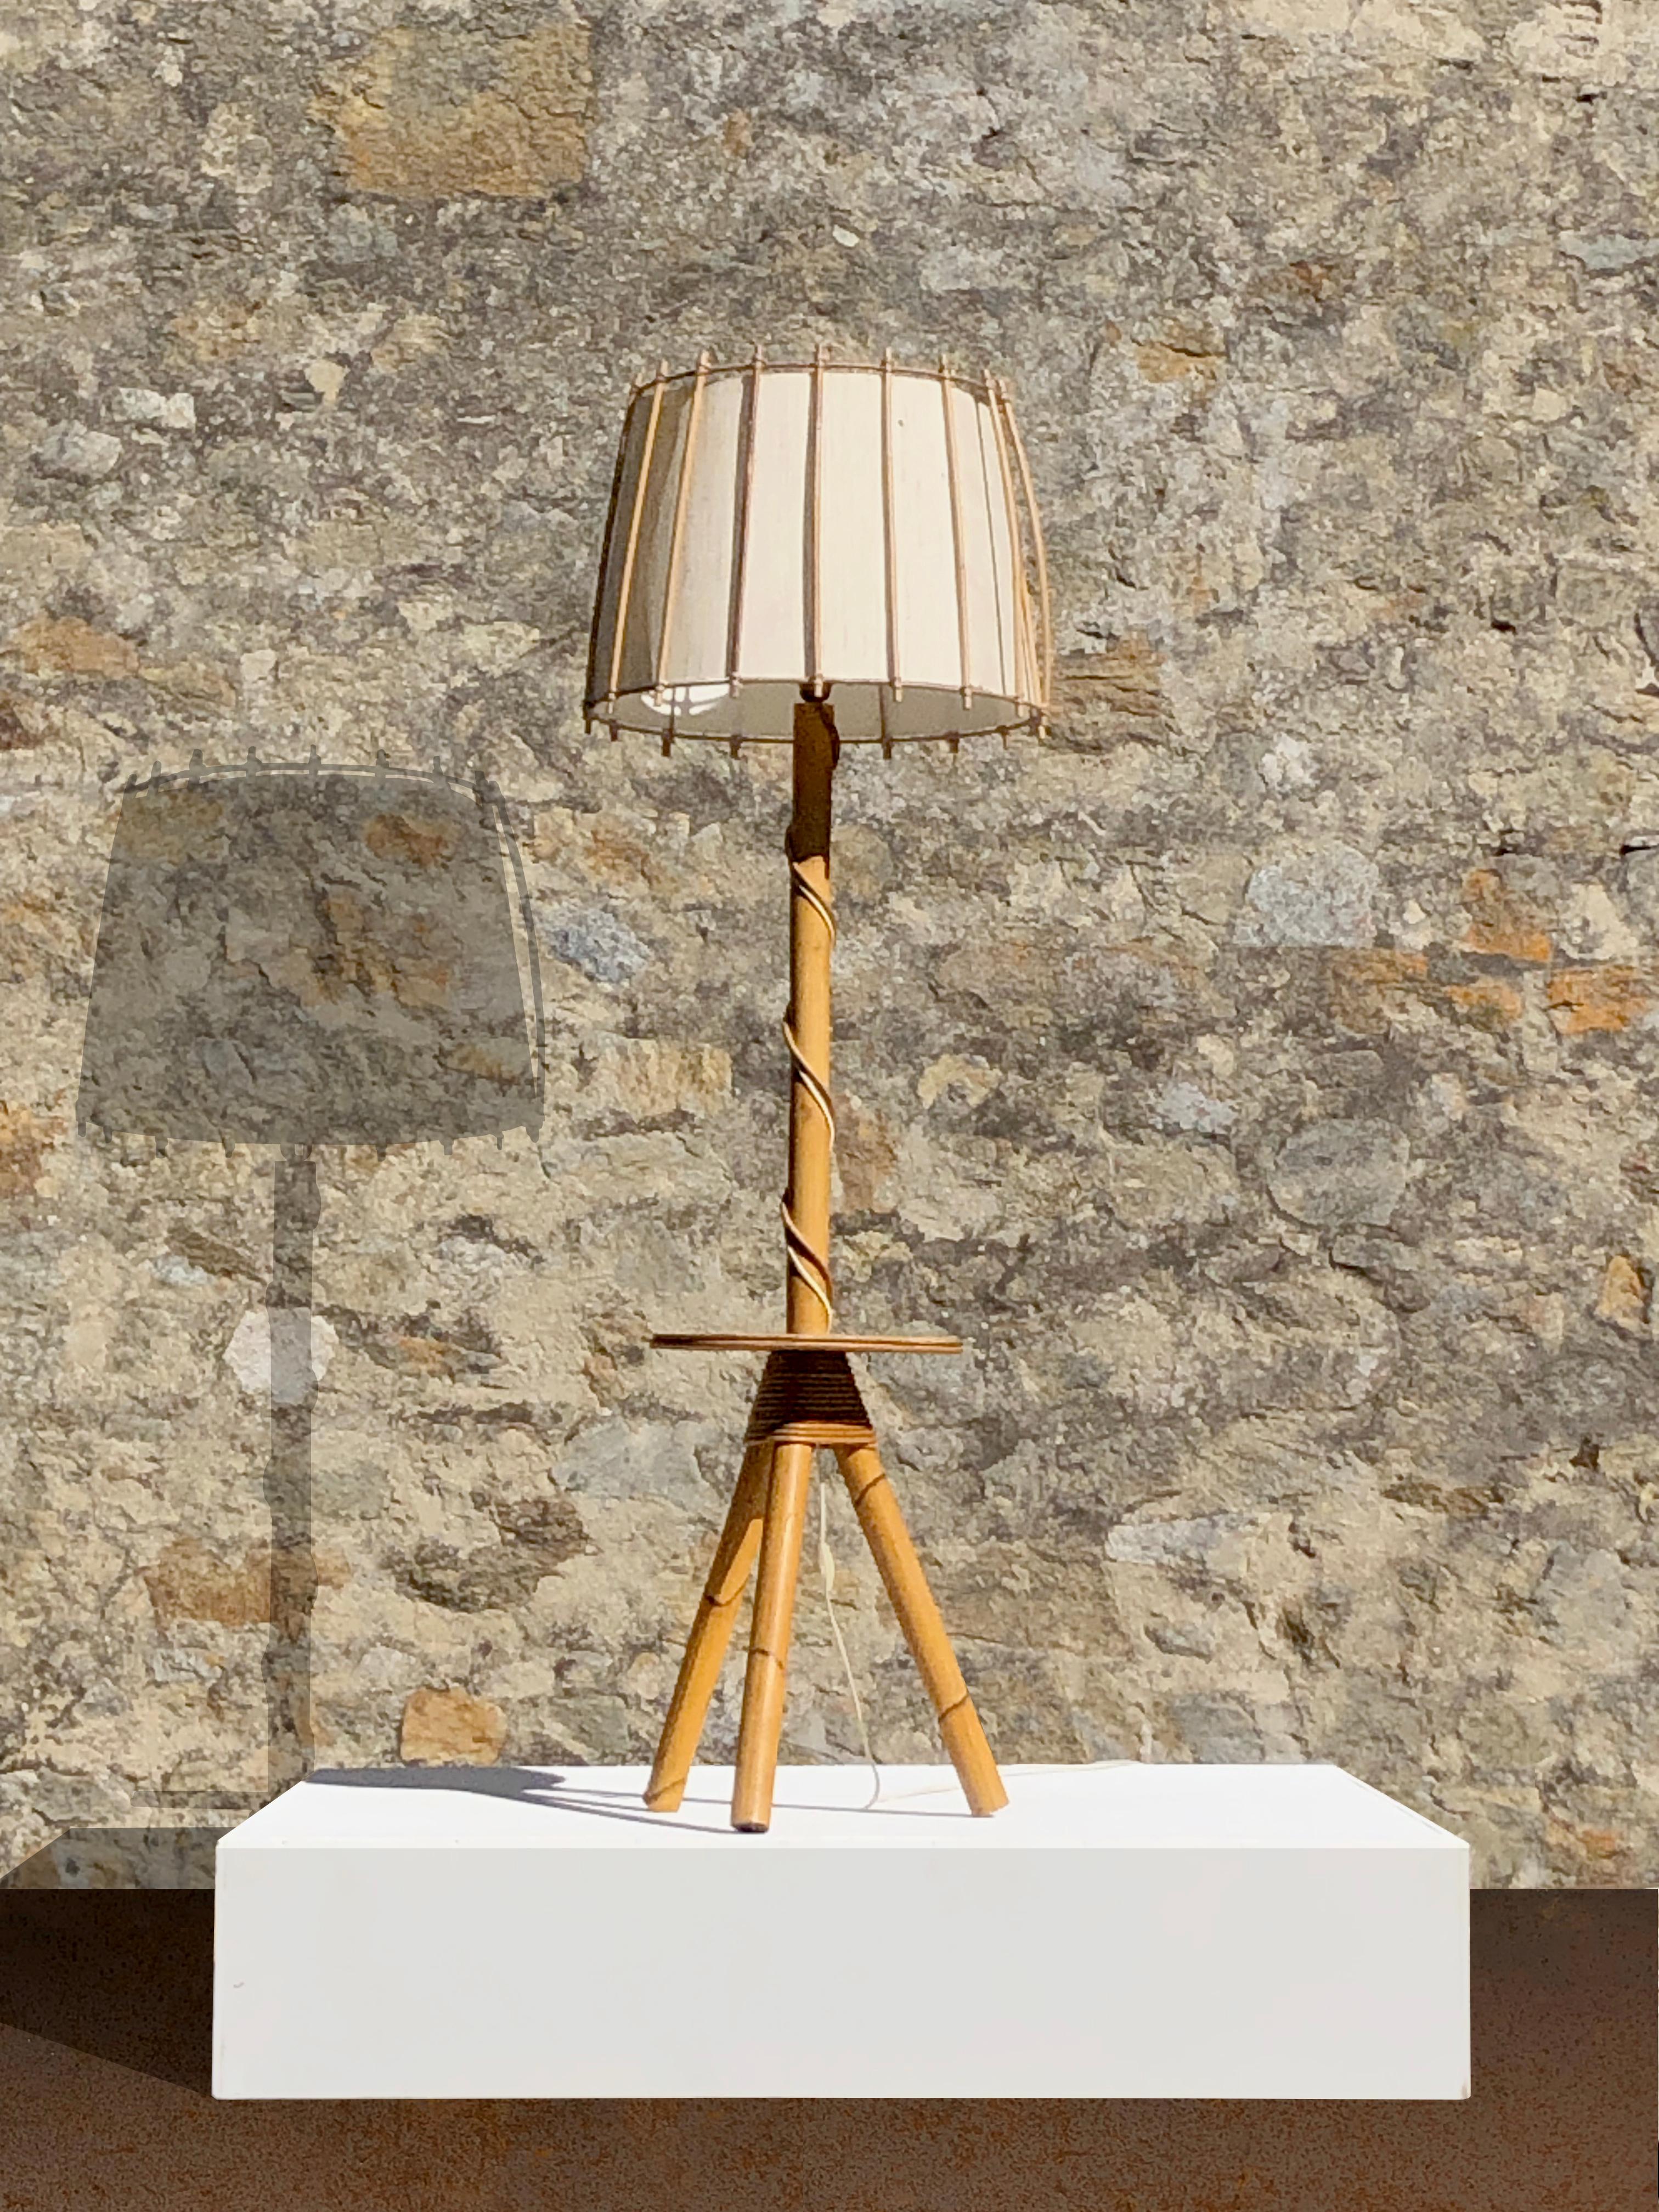 French A MID-CENTURY-MODERN MODERNIST Tripod Floor Lamp, by AUDOUX-MINNET, France 1950 For Sale